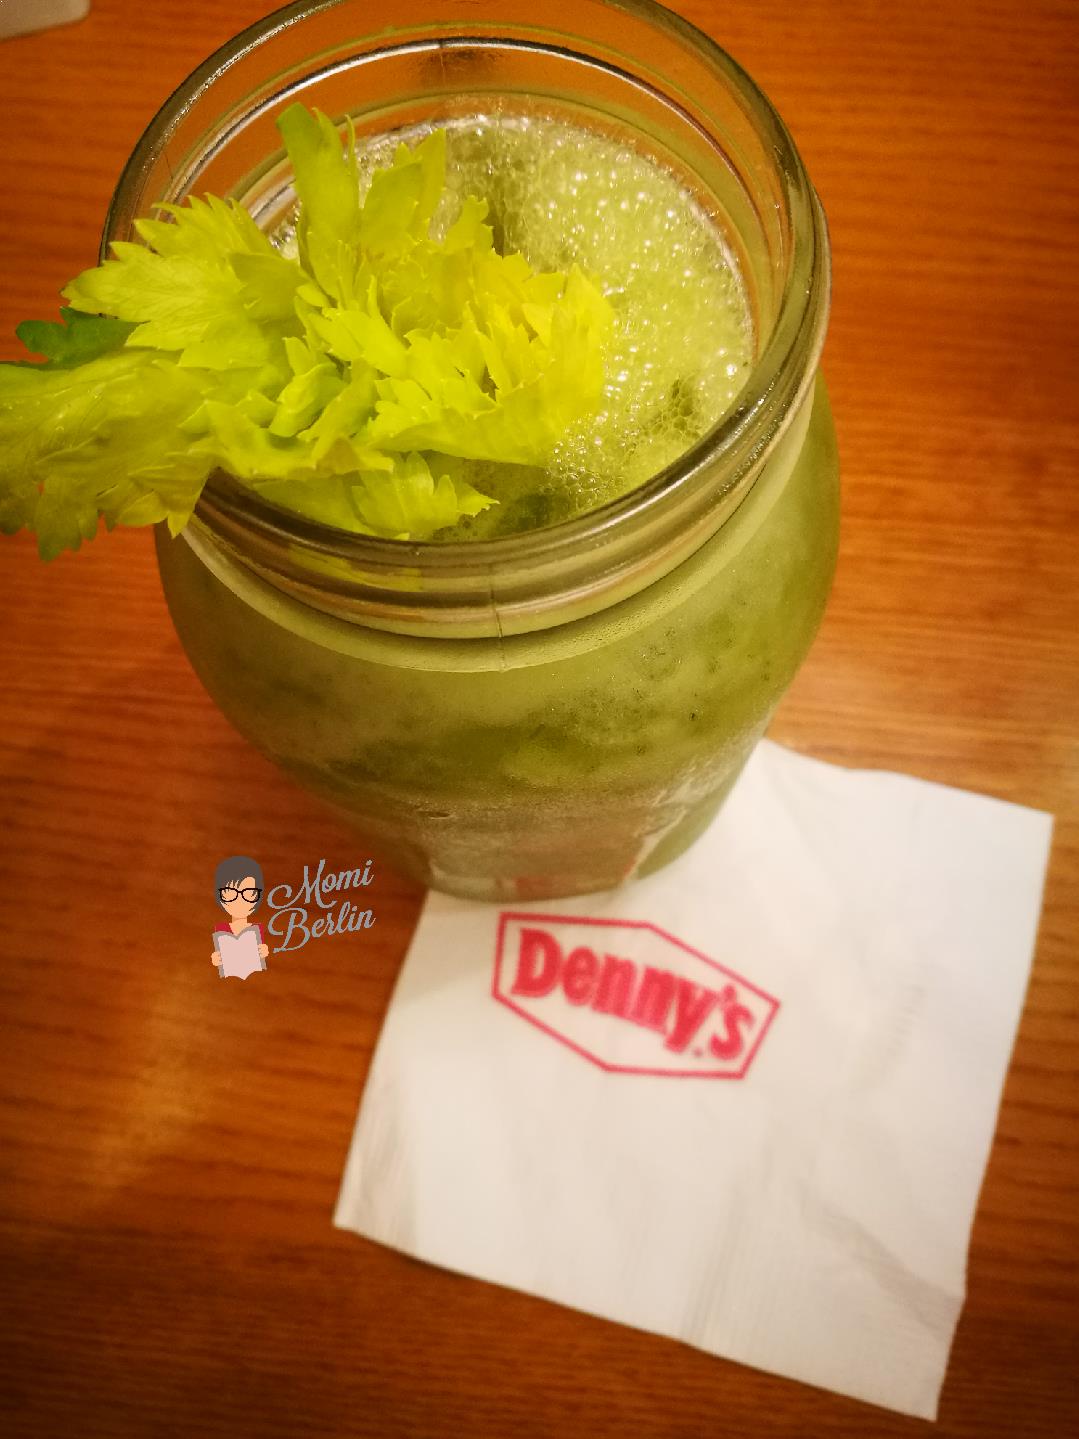 Denny's: What are you hungry for?